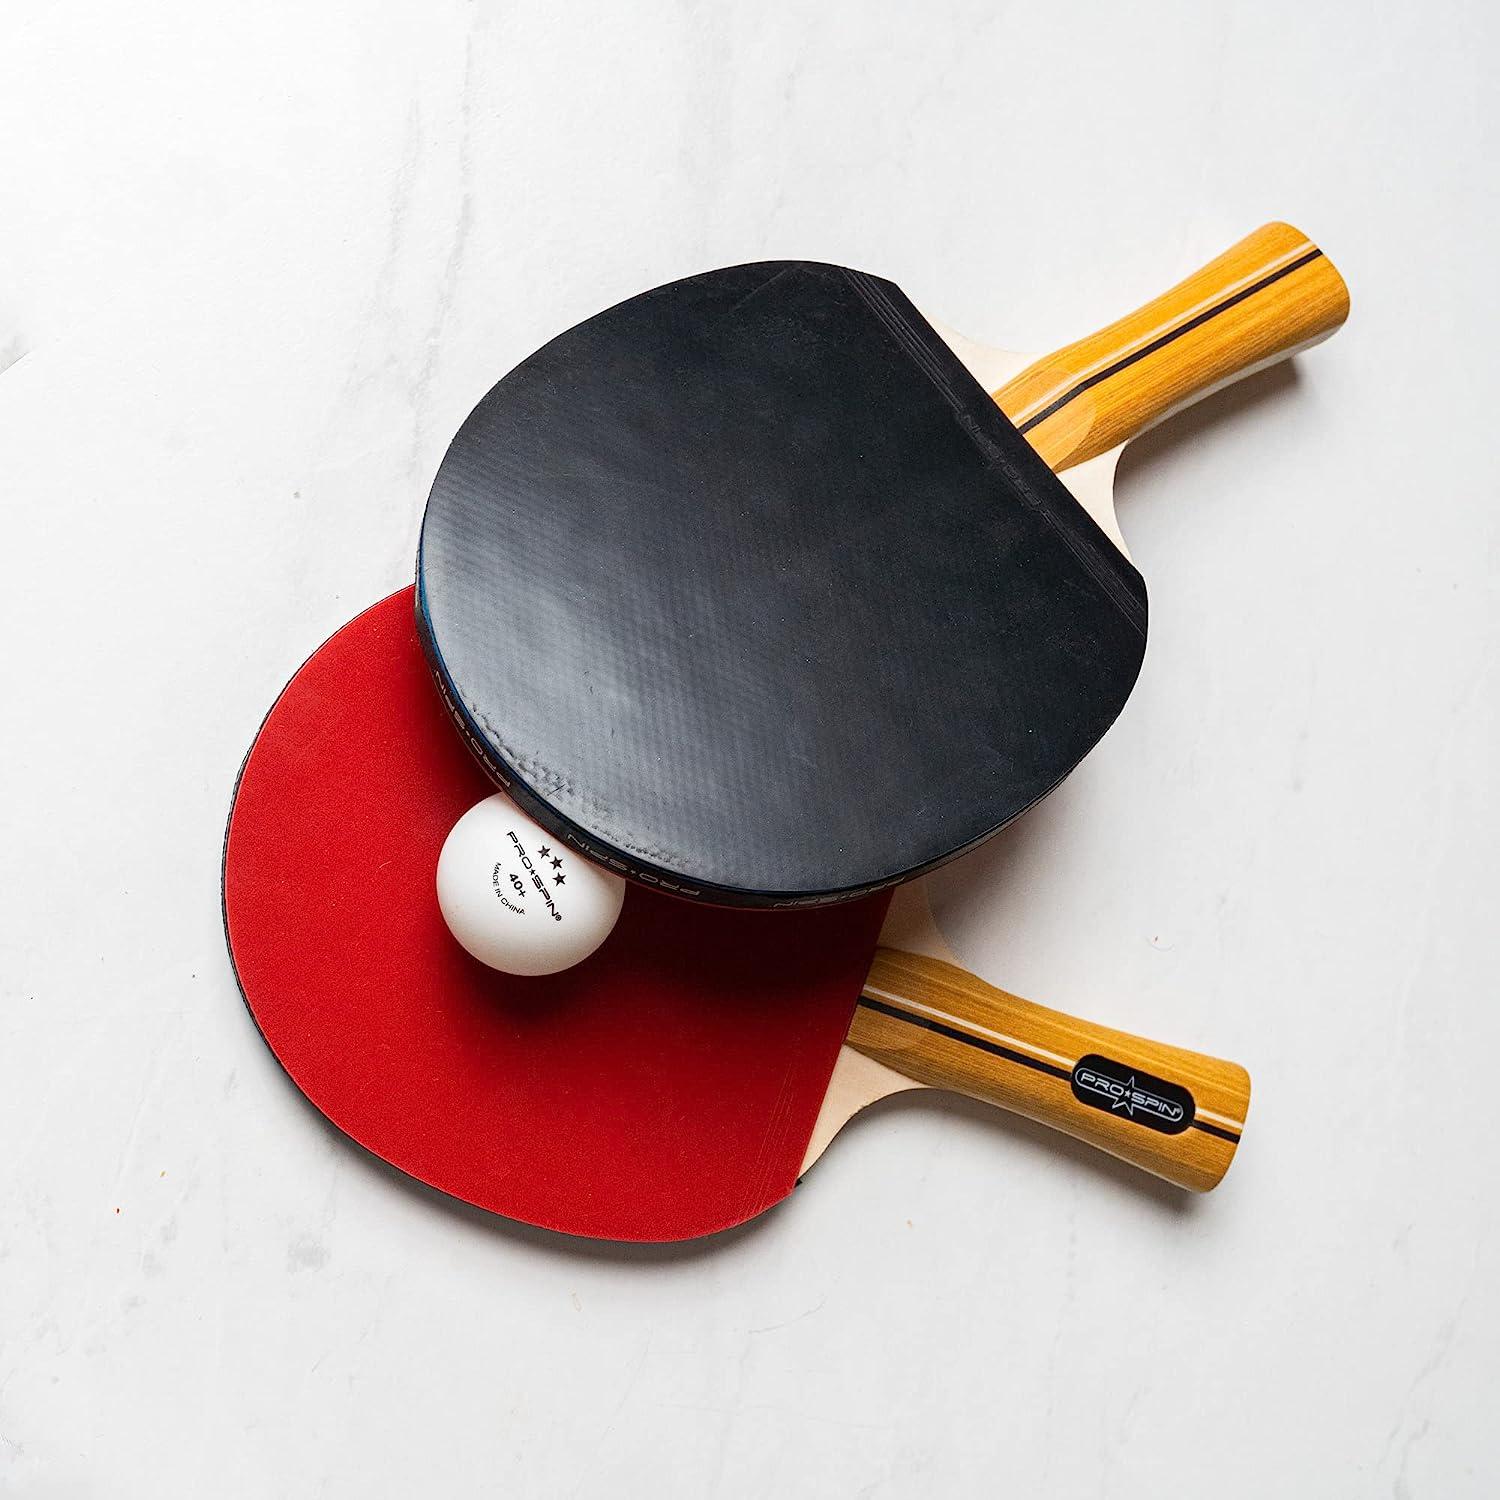 Sportout Ping Pong Paddle, Professional Table Tennis Racket with